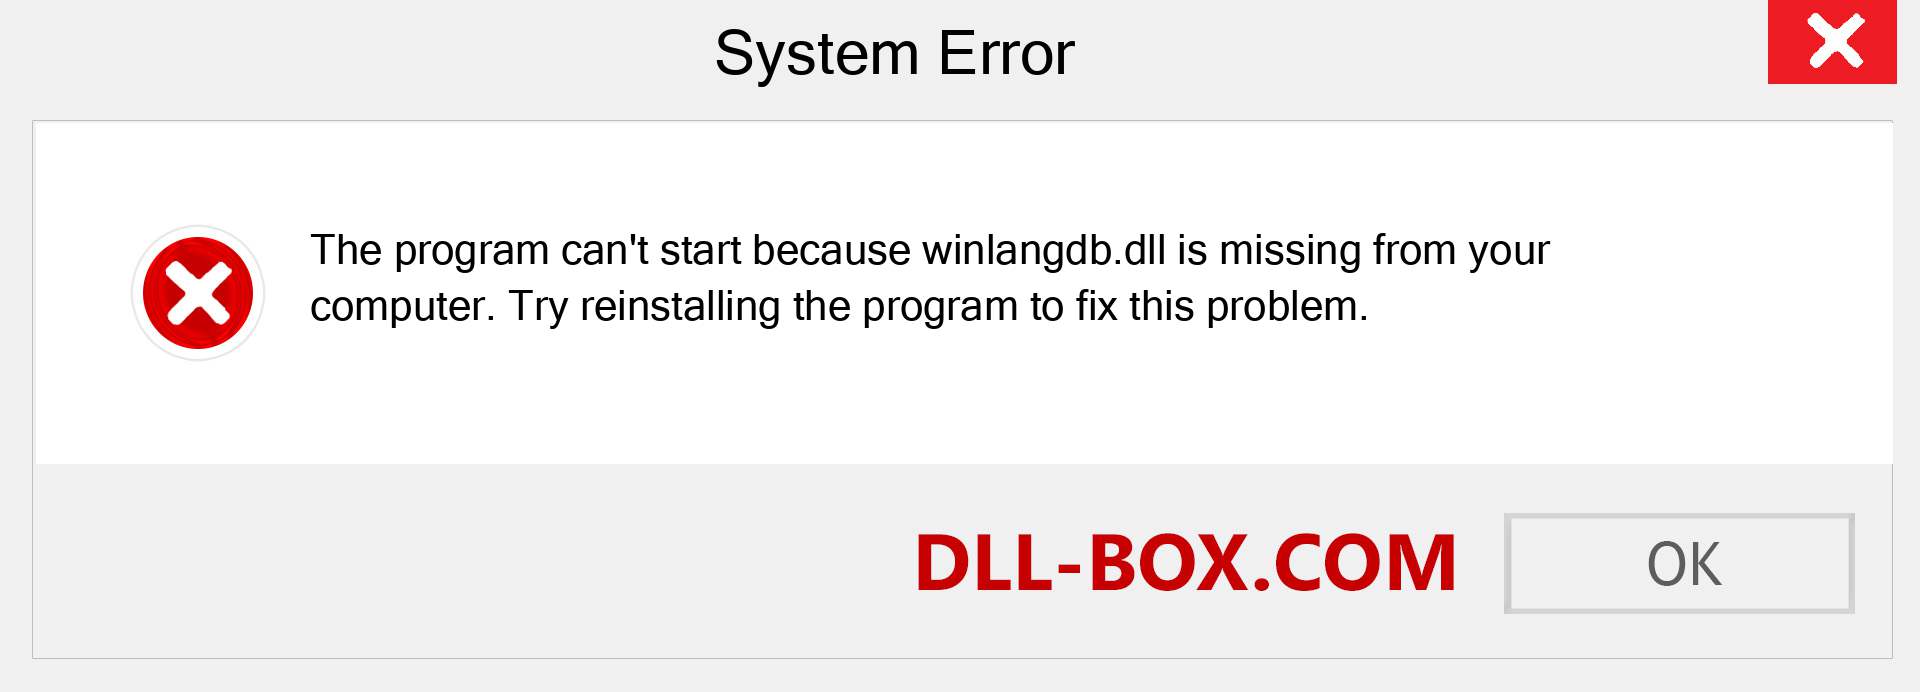  winlangdb.dll file is missing?. Download for Windows 7, 8, 10 - Fix  winlangdb dll Missing Error on Windows, photos, images